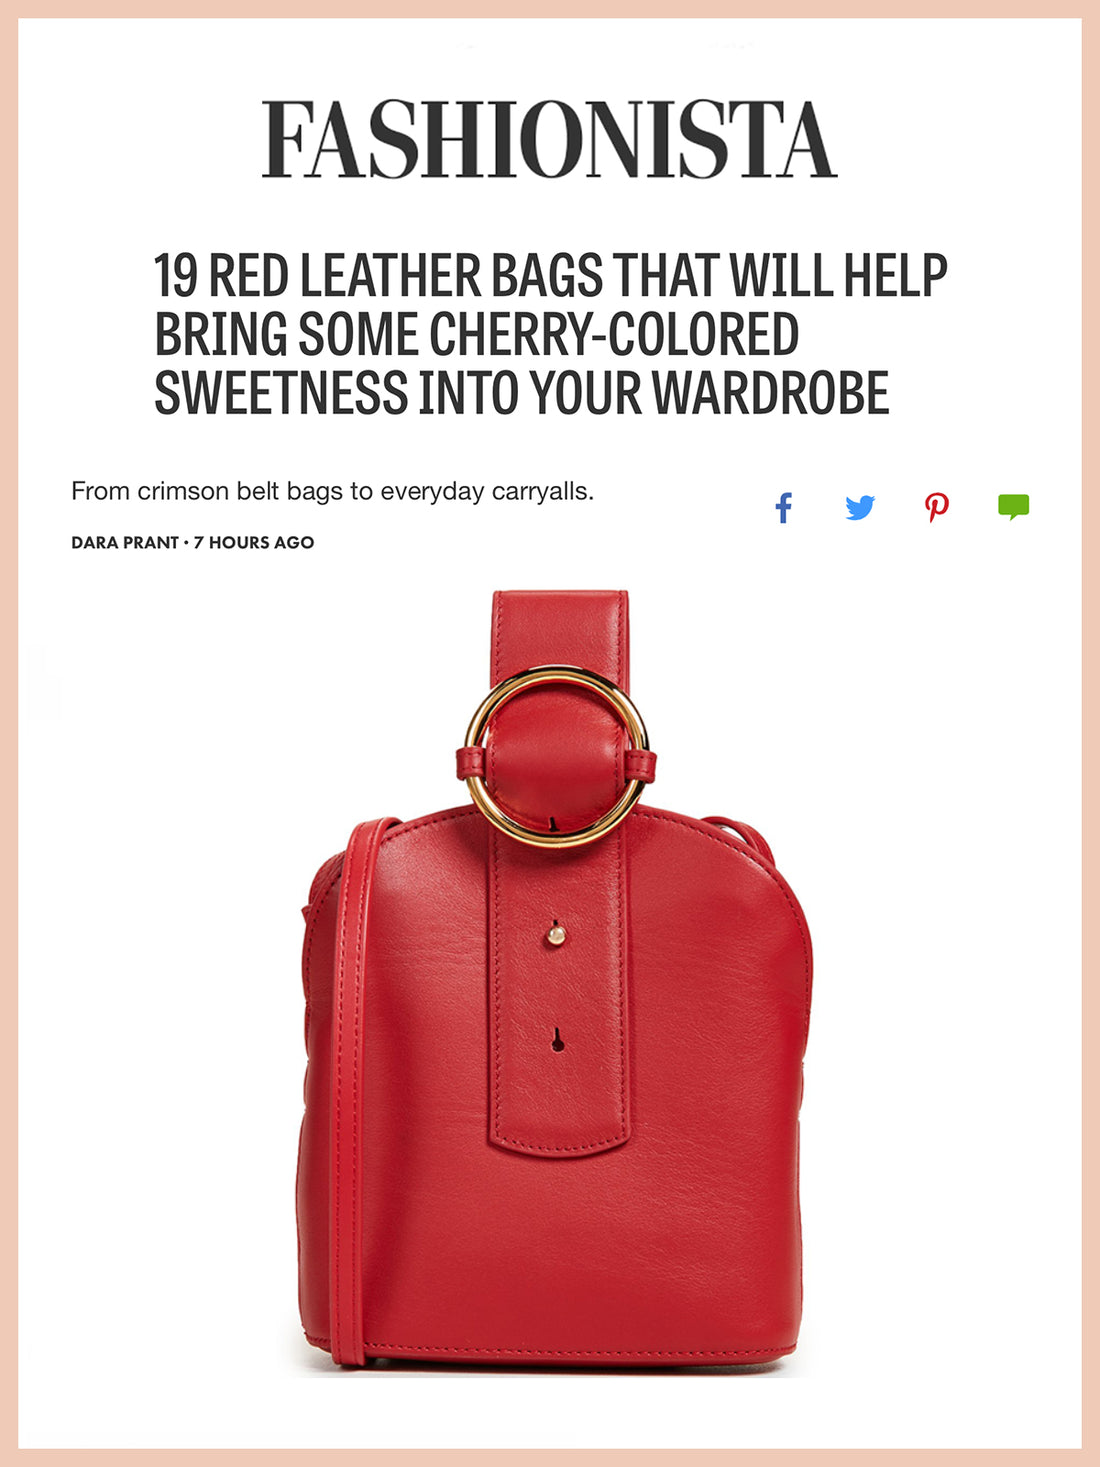 FASHIONISTA, Red Leather Bags That Will Help Bring Some Cherry-colored Sweetness